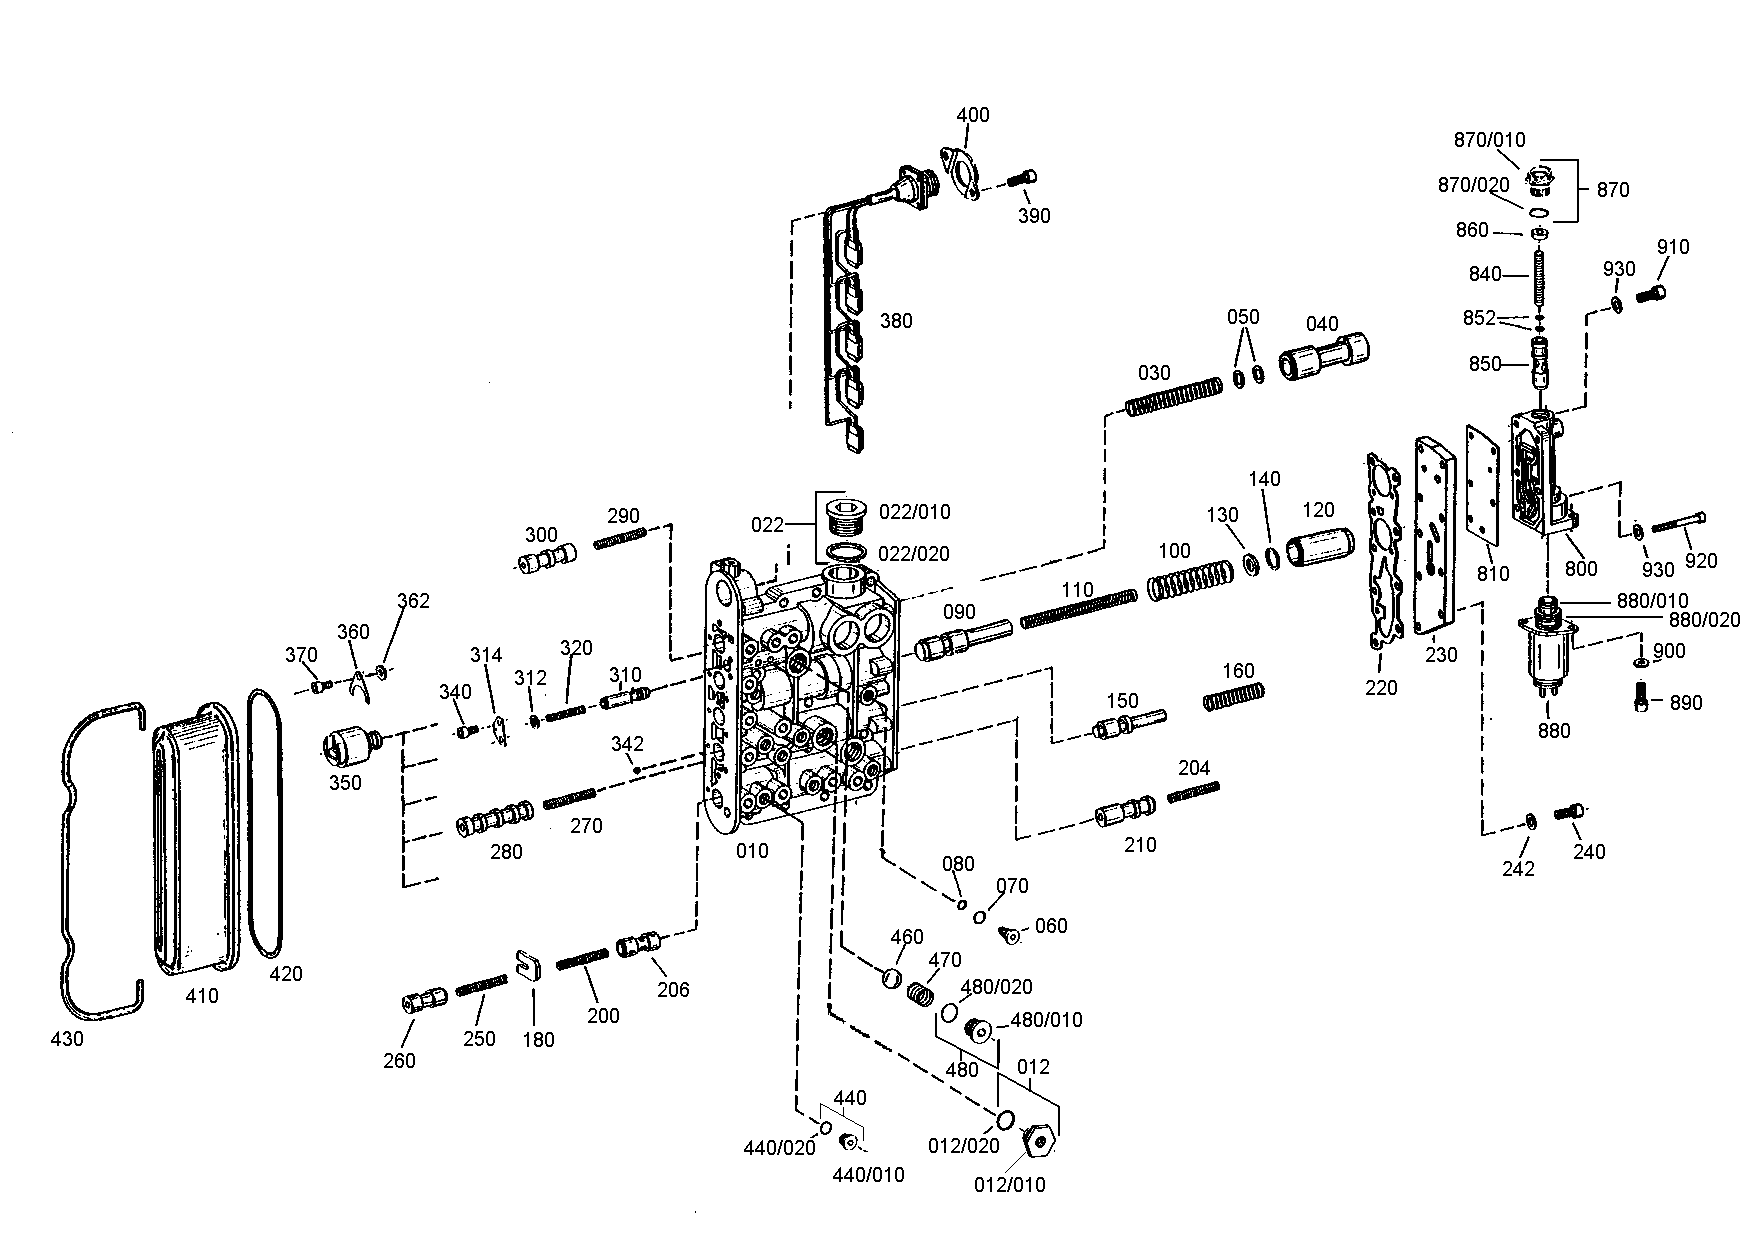 drawing for BEISSBARTH & MUELLER GMBH & CO. 15268837 - GEAR SHIFT HOUSING (figure 2)